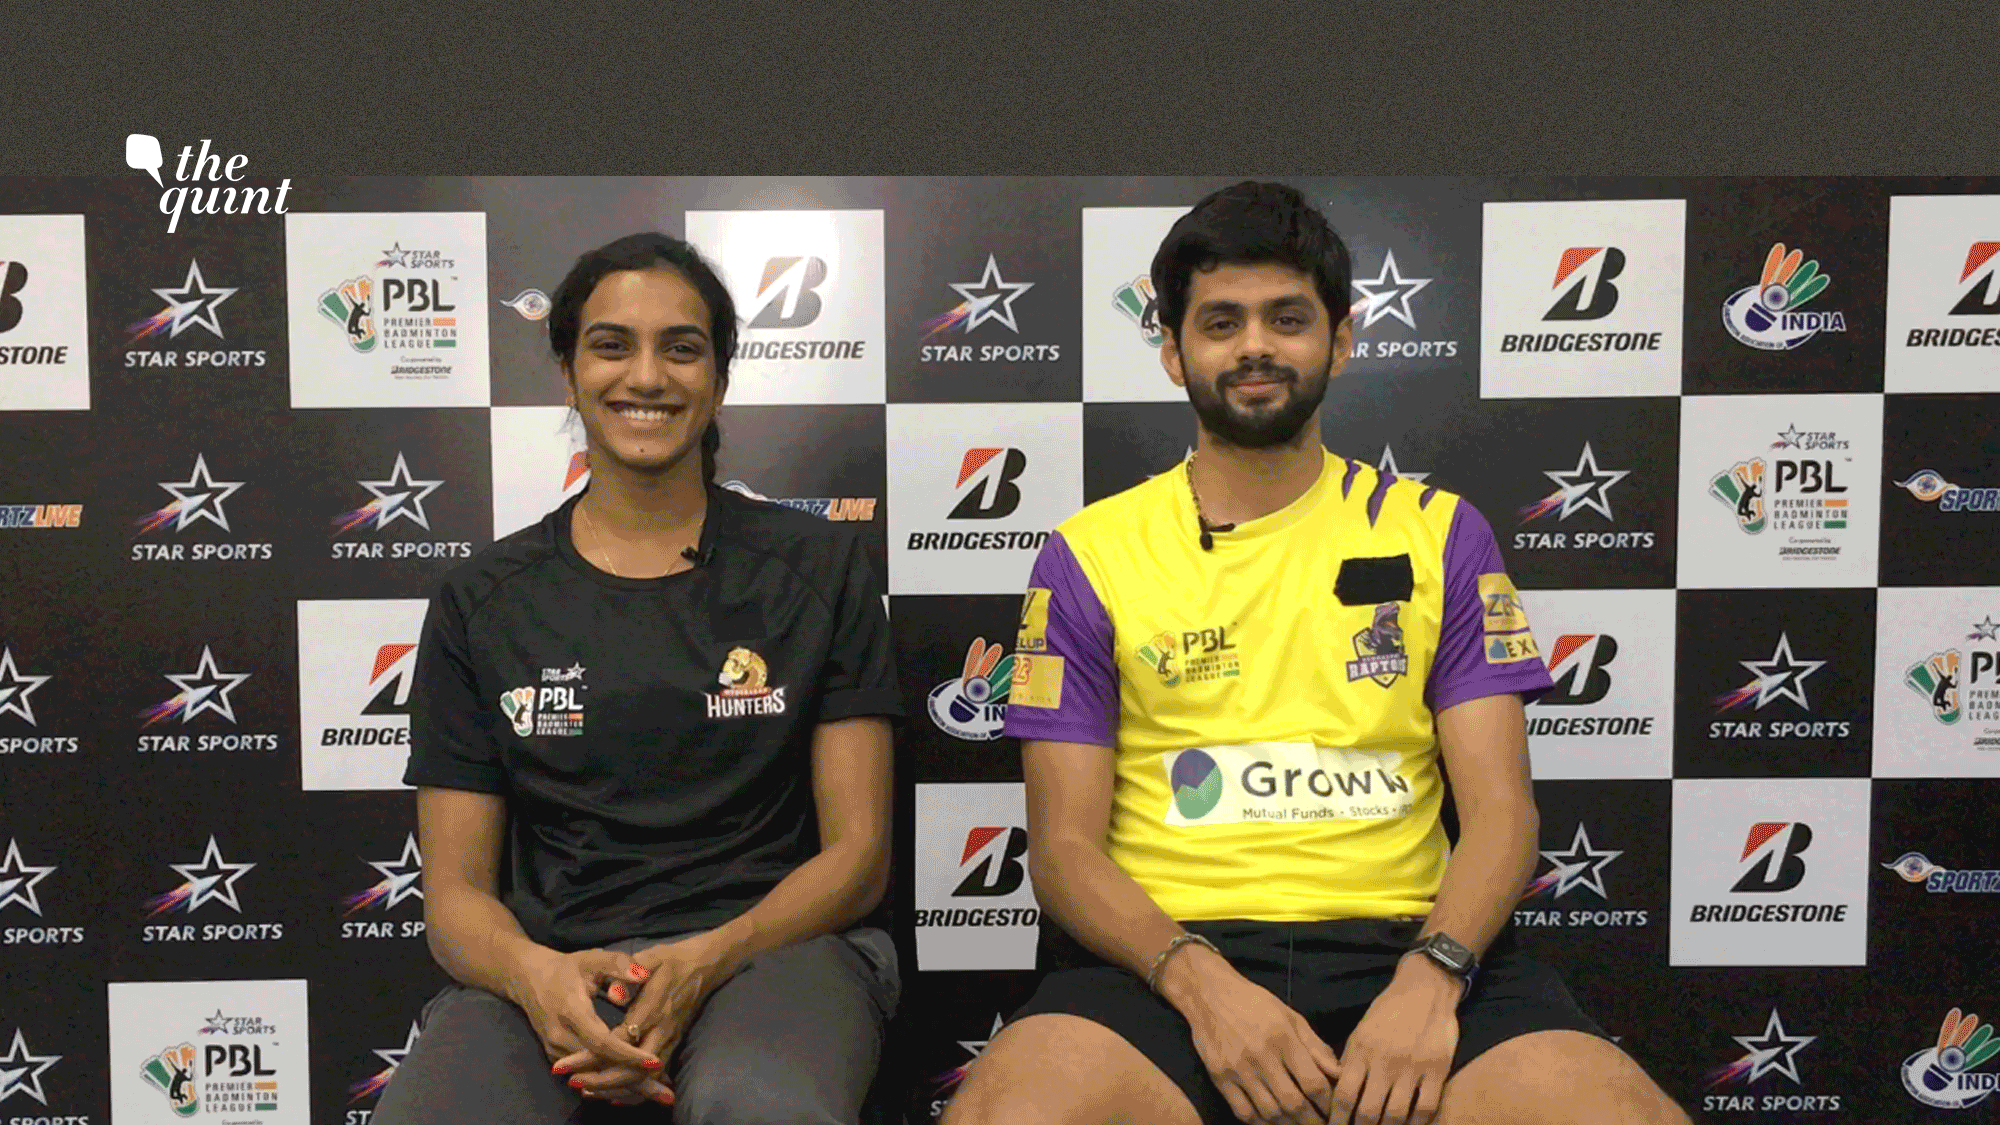 PV Sindhu and Sai Praneeth, India’s top ranked women’s and men’s badminton players, sit down for a candid chat with The Quint.